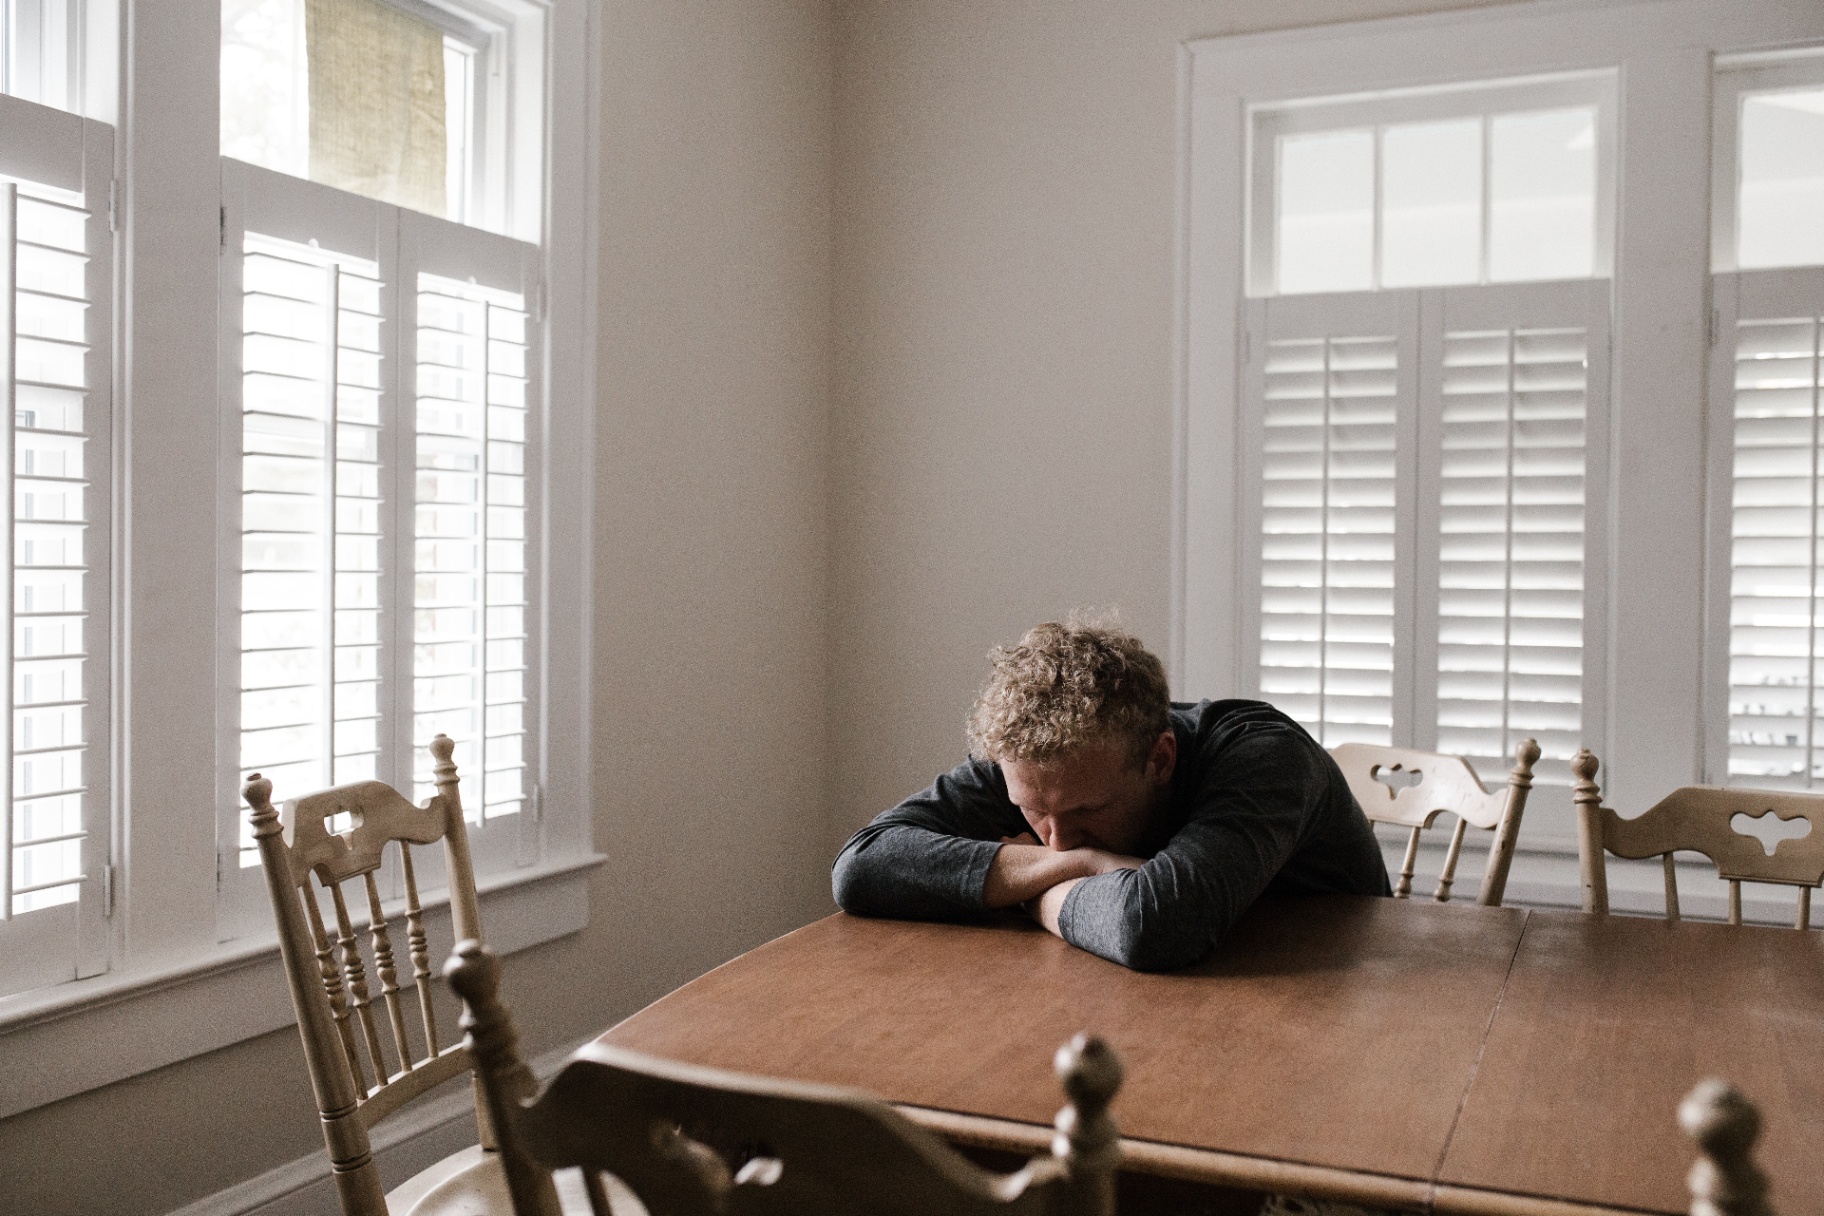 Image of an upset man laying his head on his arms at a table. Is your anxiety keeping you from living your life? Learn how anxiety therapy in Saint Petersburg, FL can help you begin working to overcome your symptoms in healthy ways.